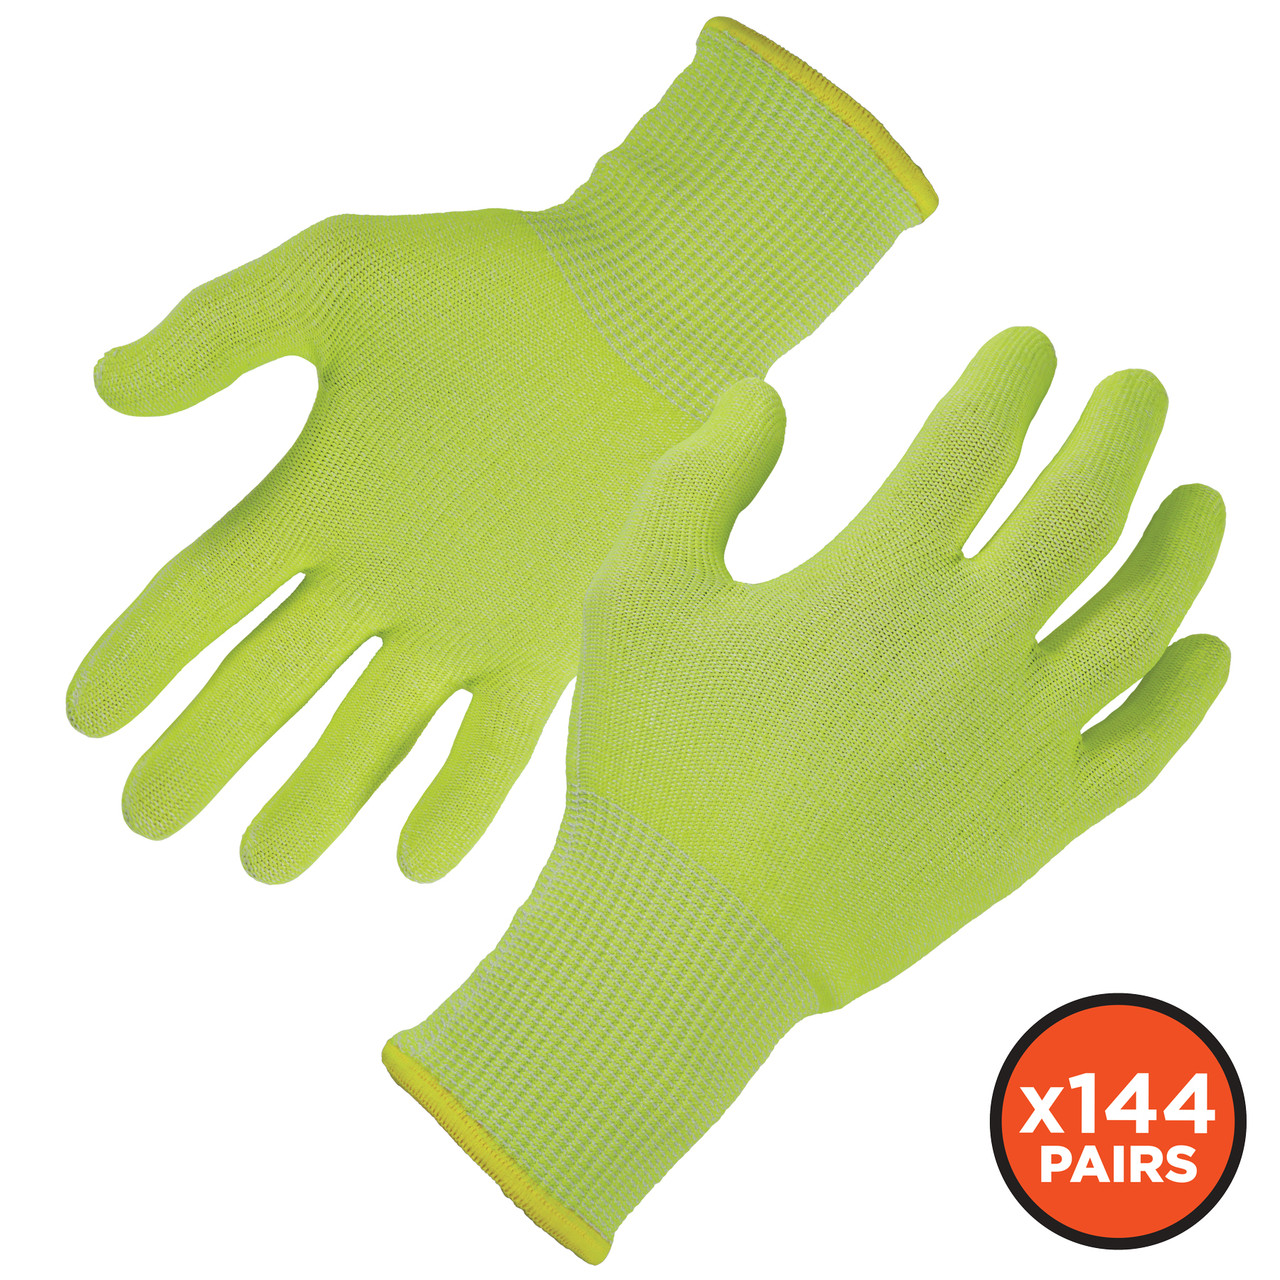 https://cdn11.bigcommerce.com/s-8715e/images/stencil/1280x1280/products/362864/684389/18022-7040-case-cut-resistant-food-grade-gloves-pair-x144-pairs_0__23062.1702331798.jpg?c=2